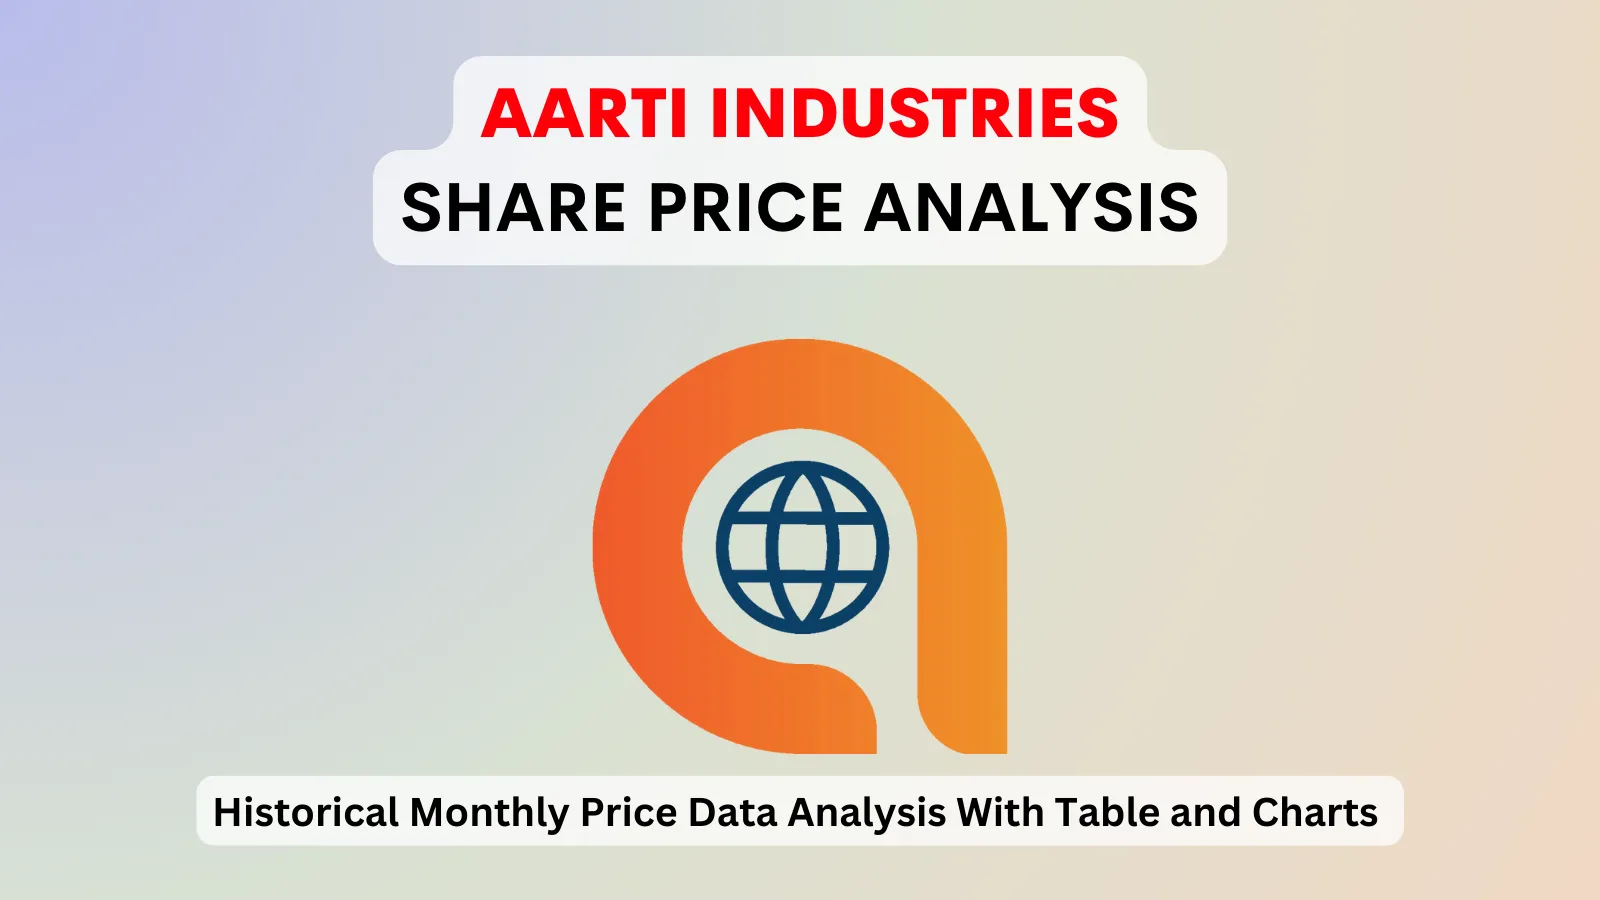 Aarti Industries share price analysis